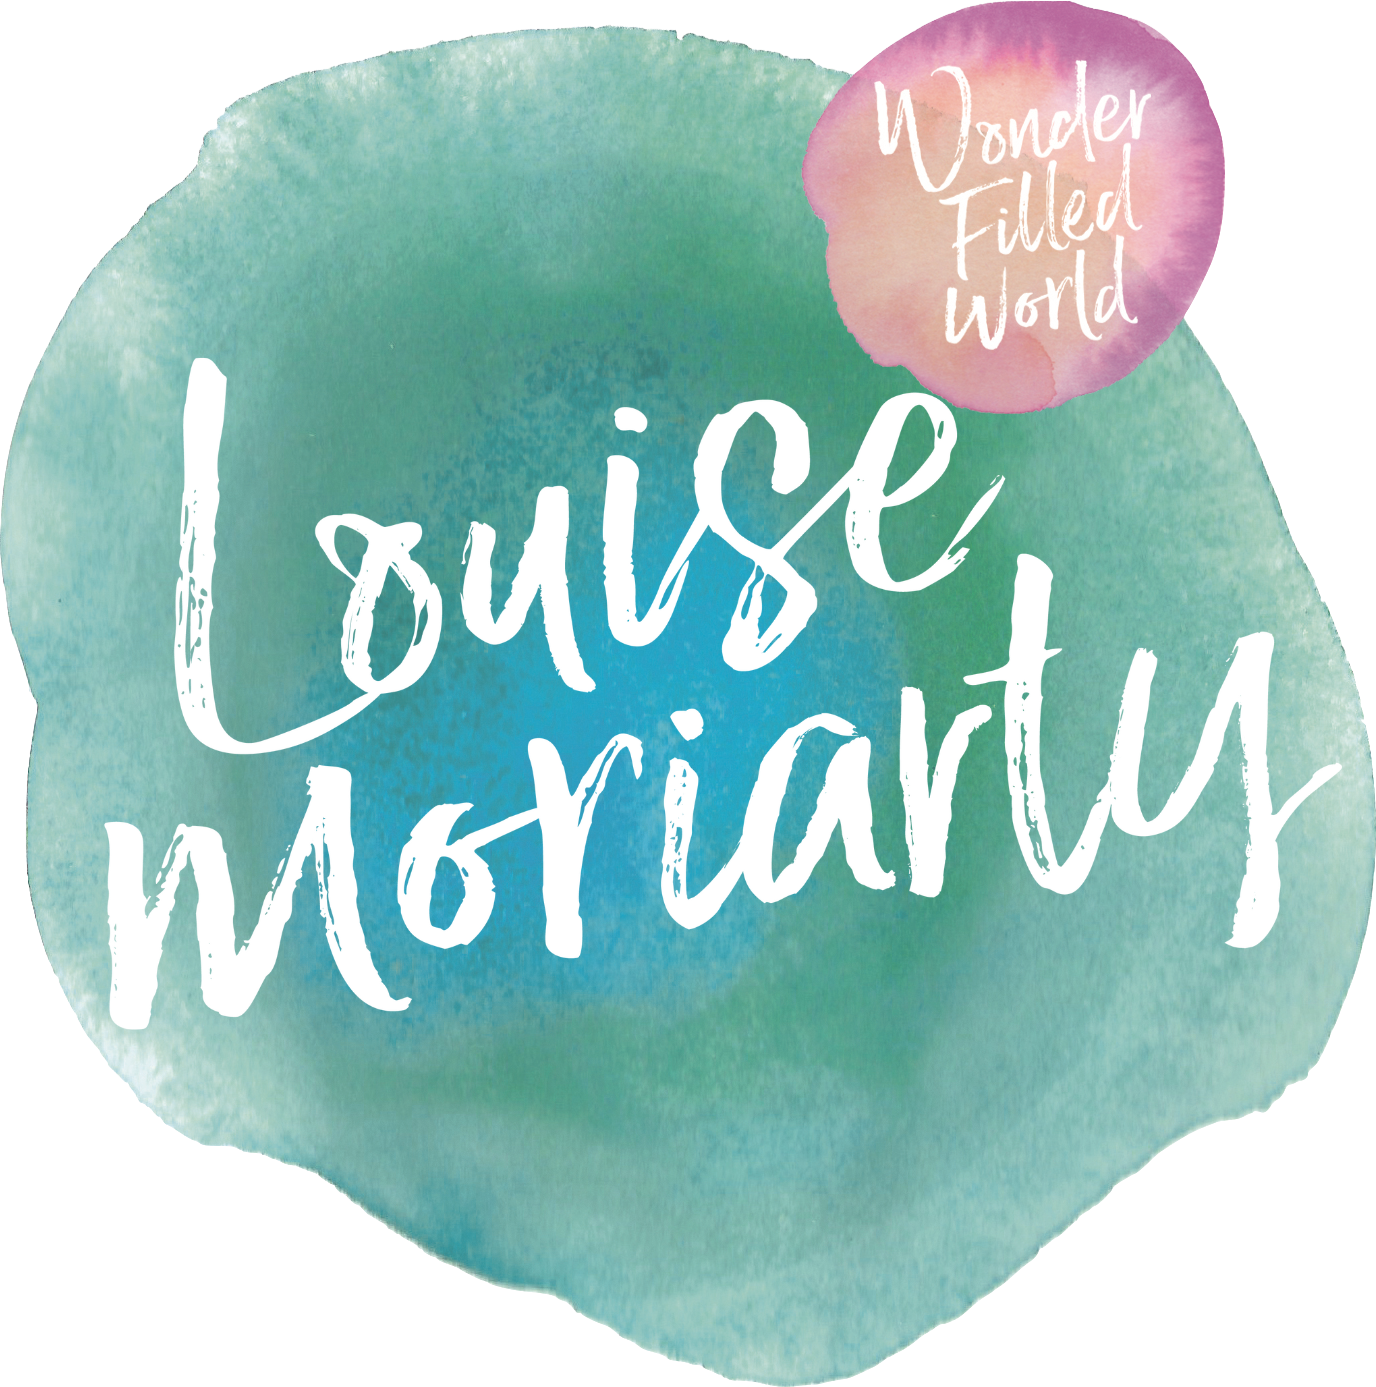 Louise Moriarty